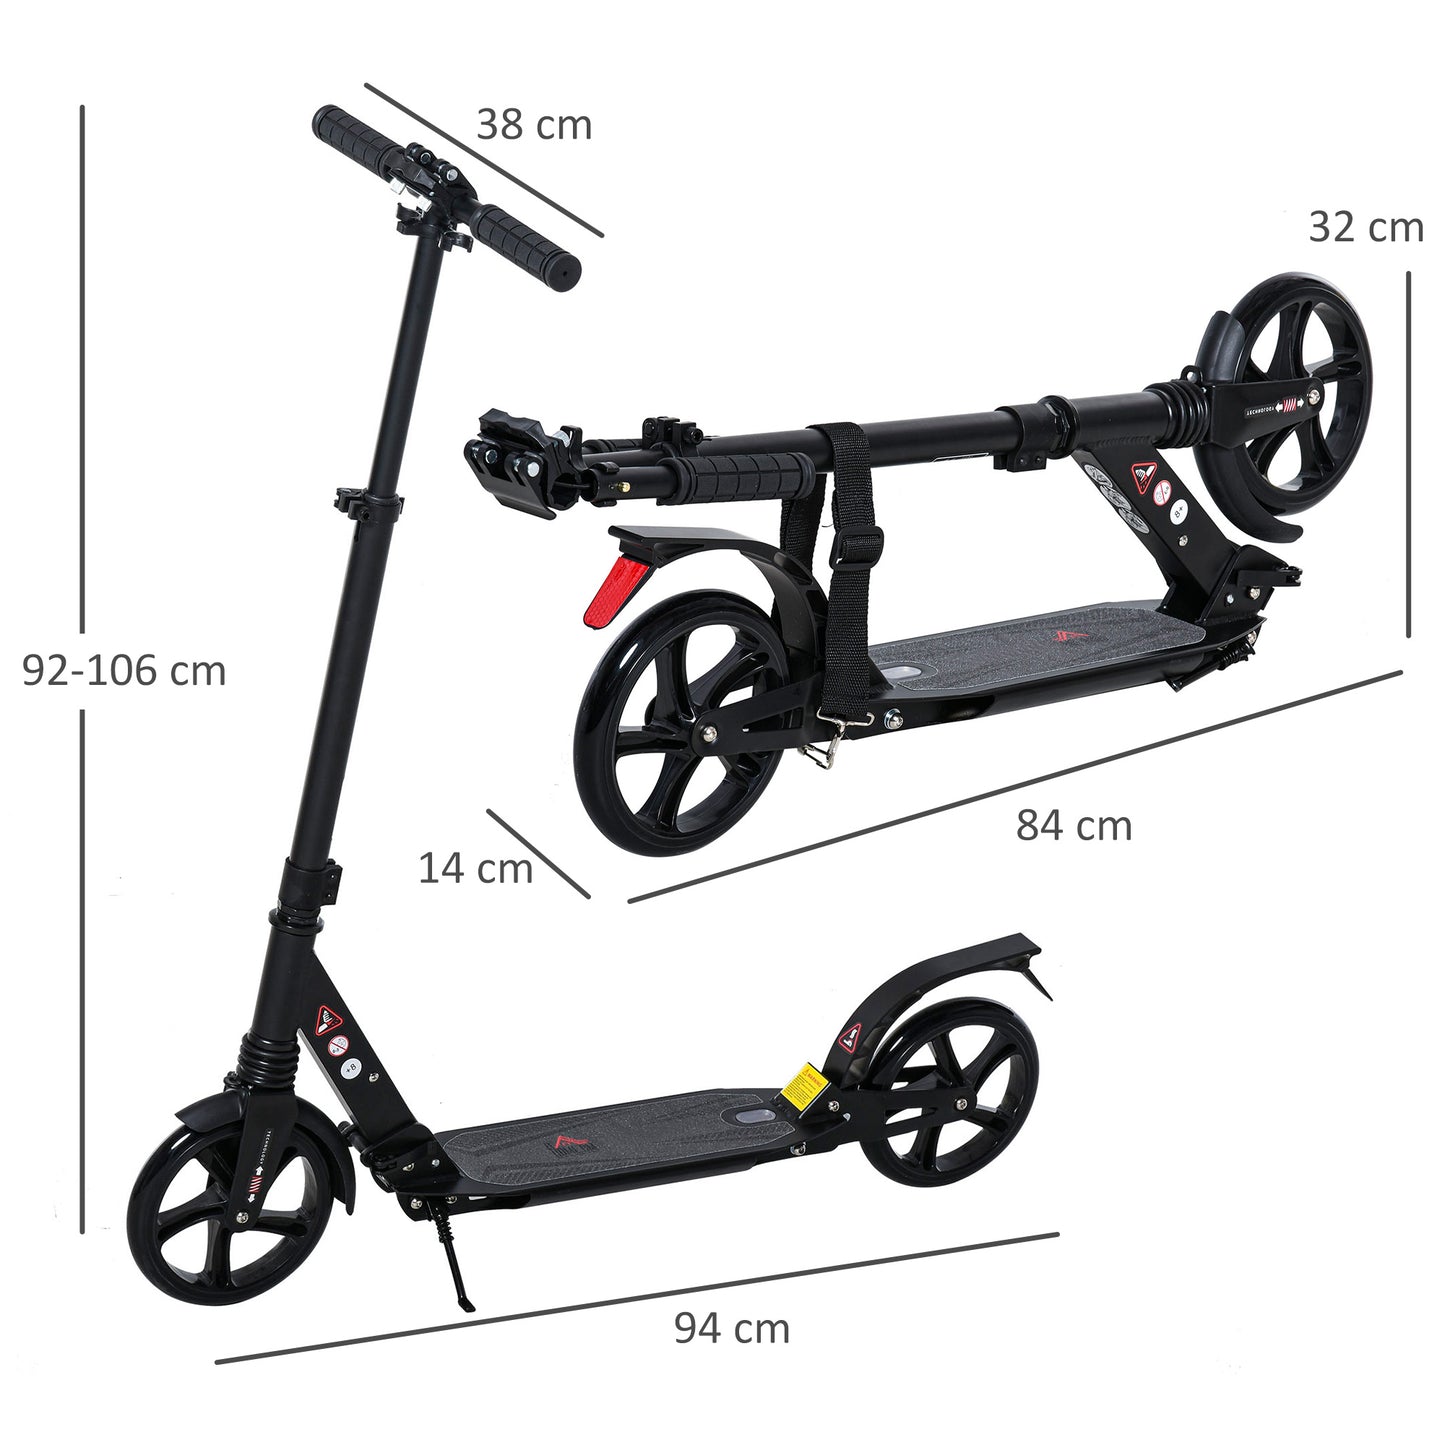 HOMCOM Foldable Aluminum Ride On Toy Kick Scooter For 8+ Adult Teens w/ Foot Brake